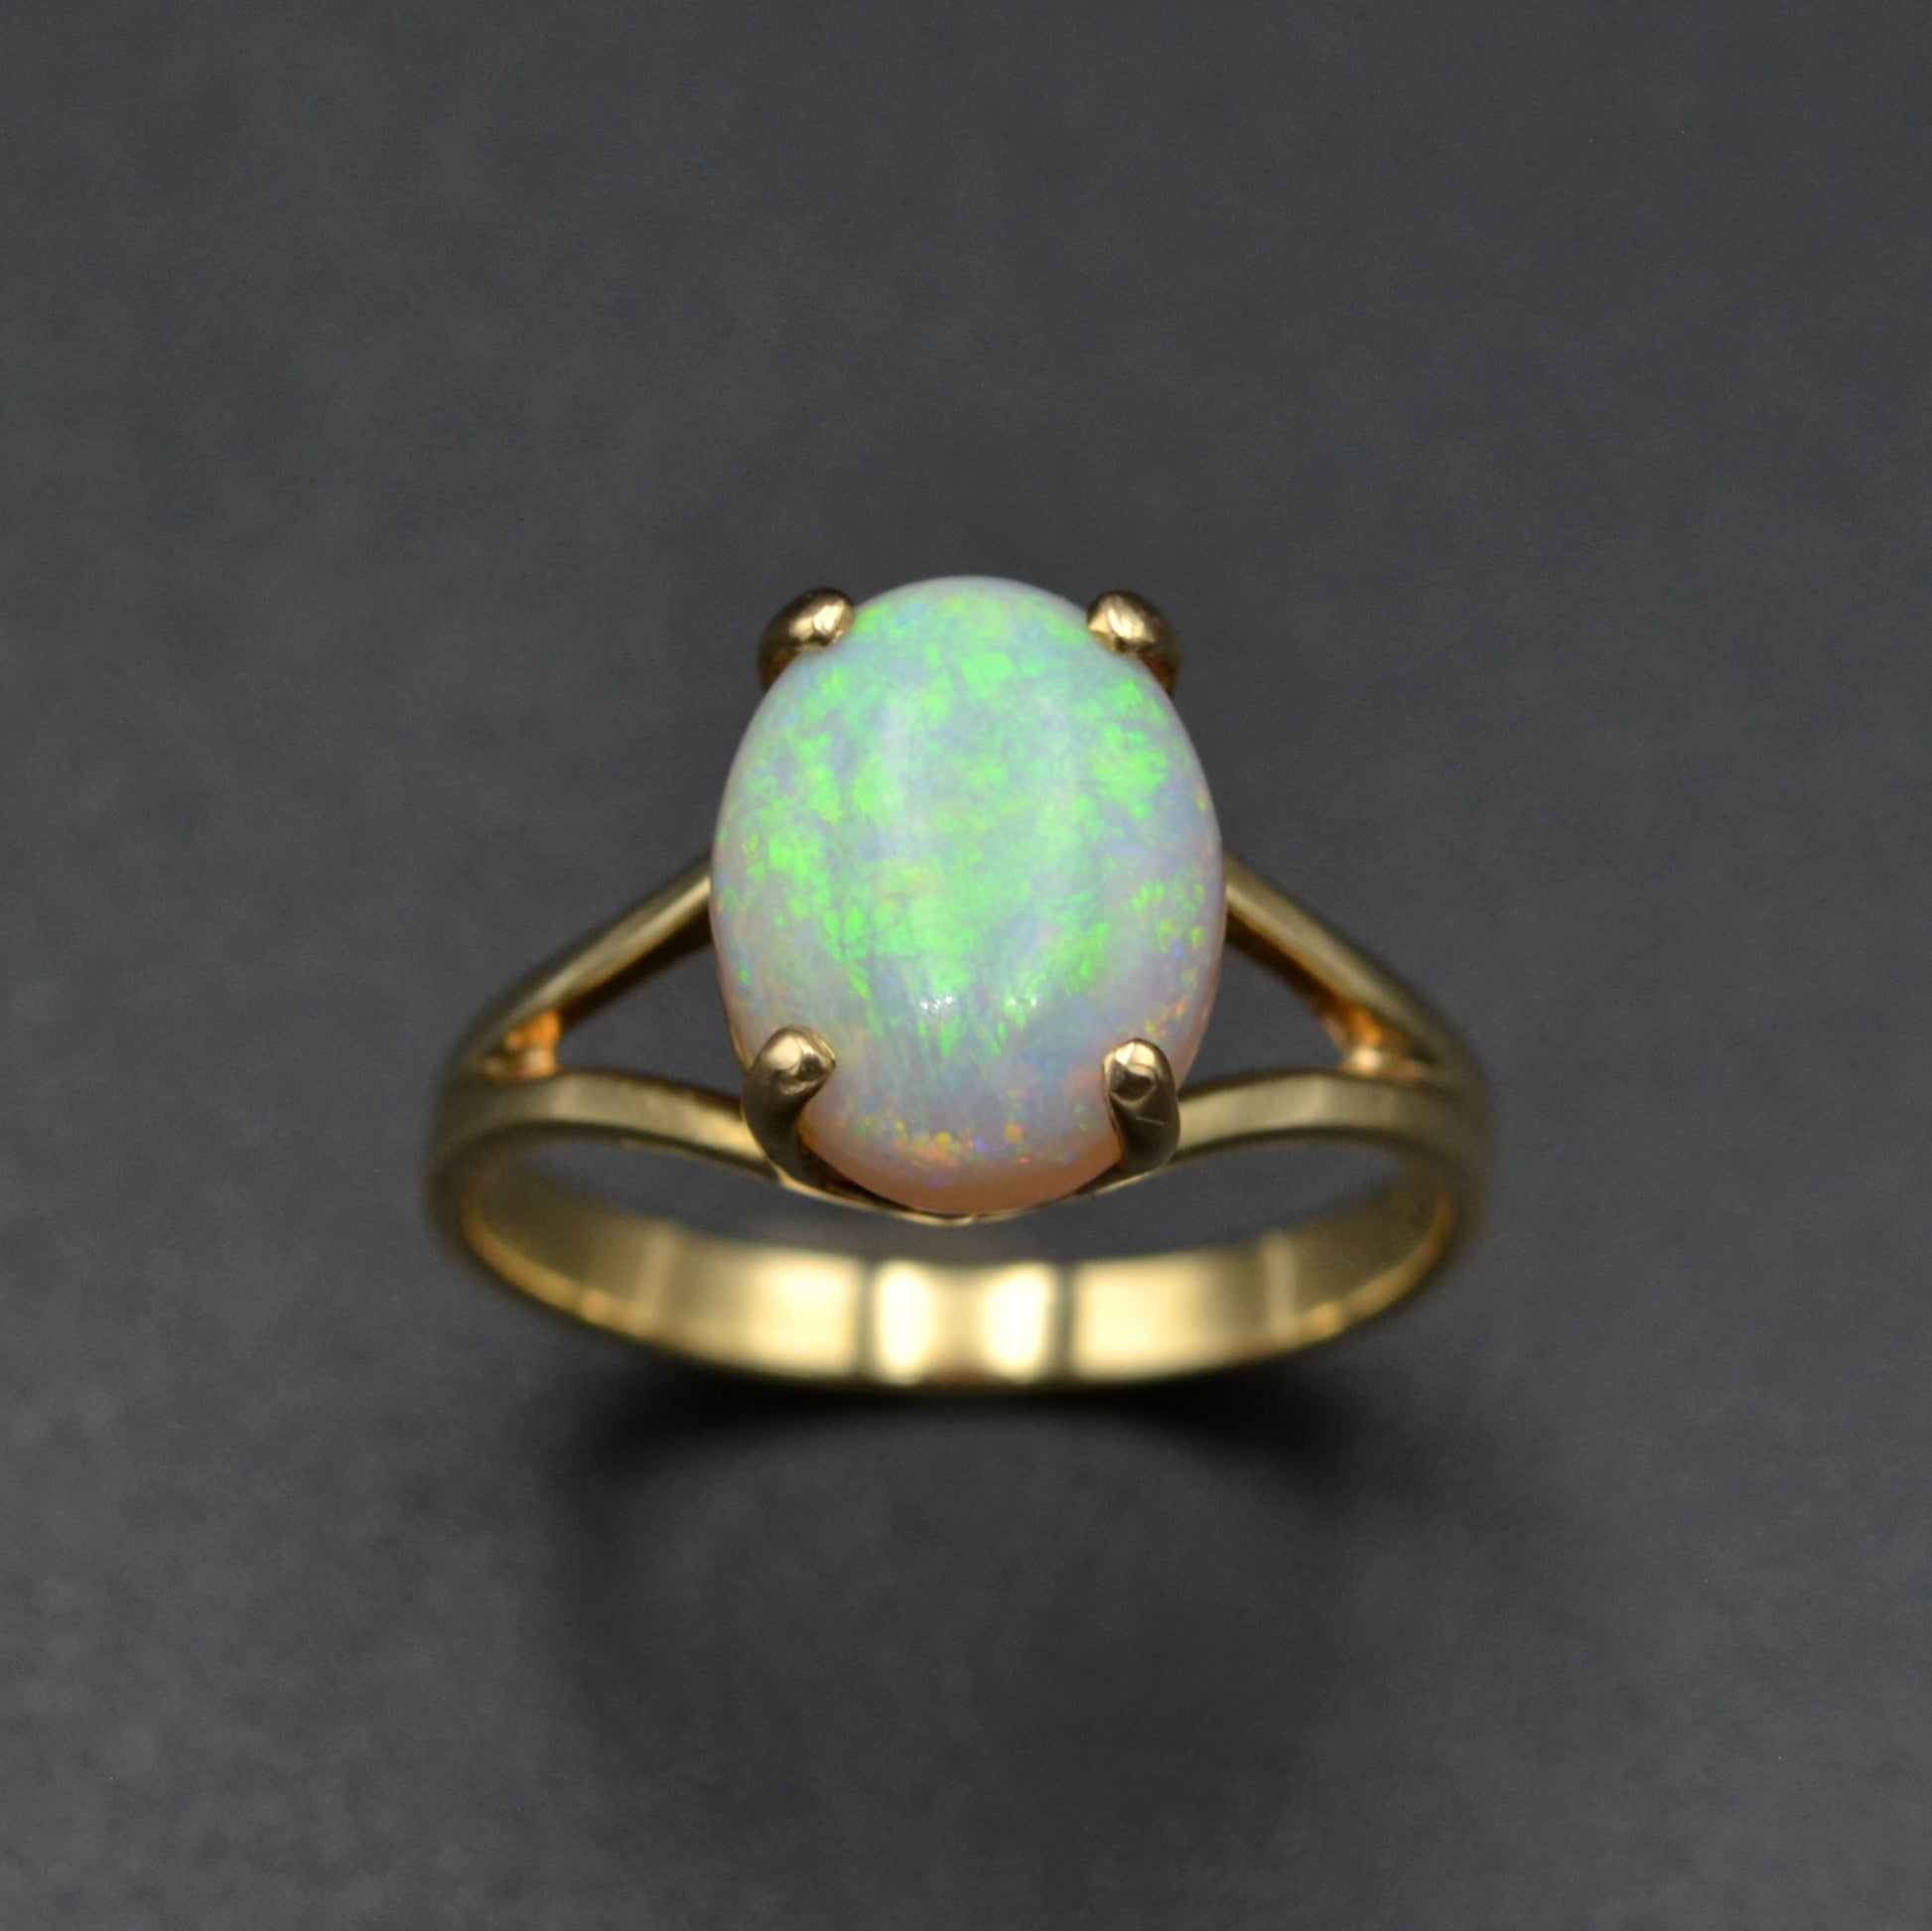 Vintage White Opal and 14k Gold Solitaire Ring